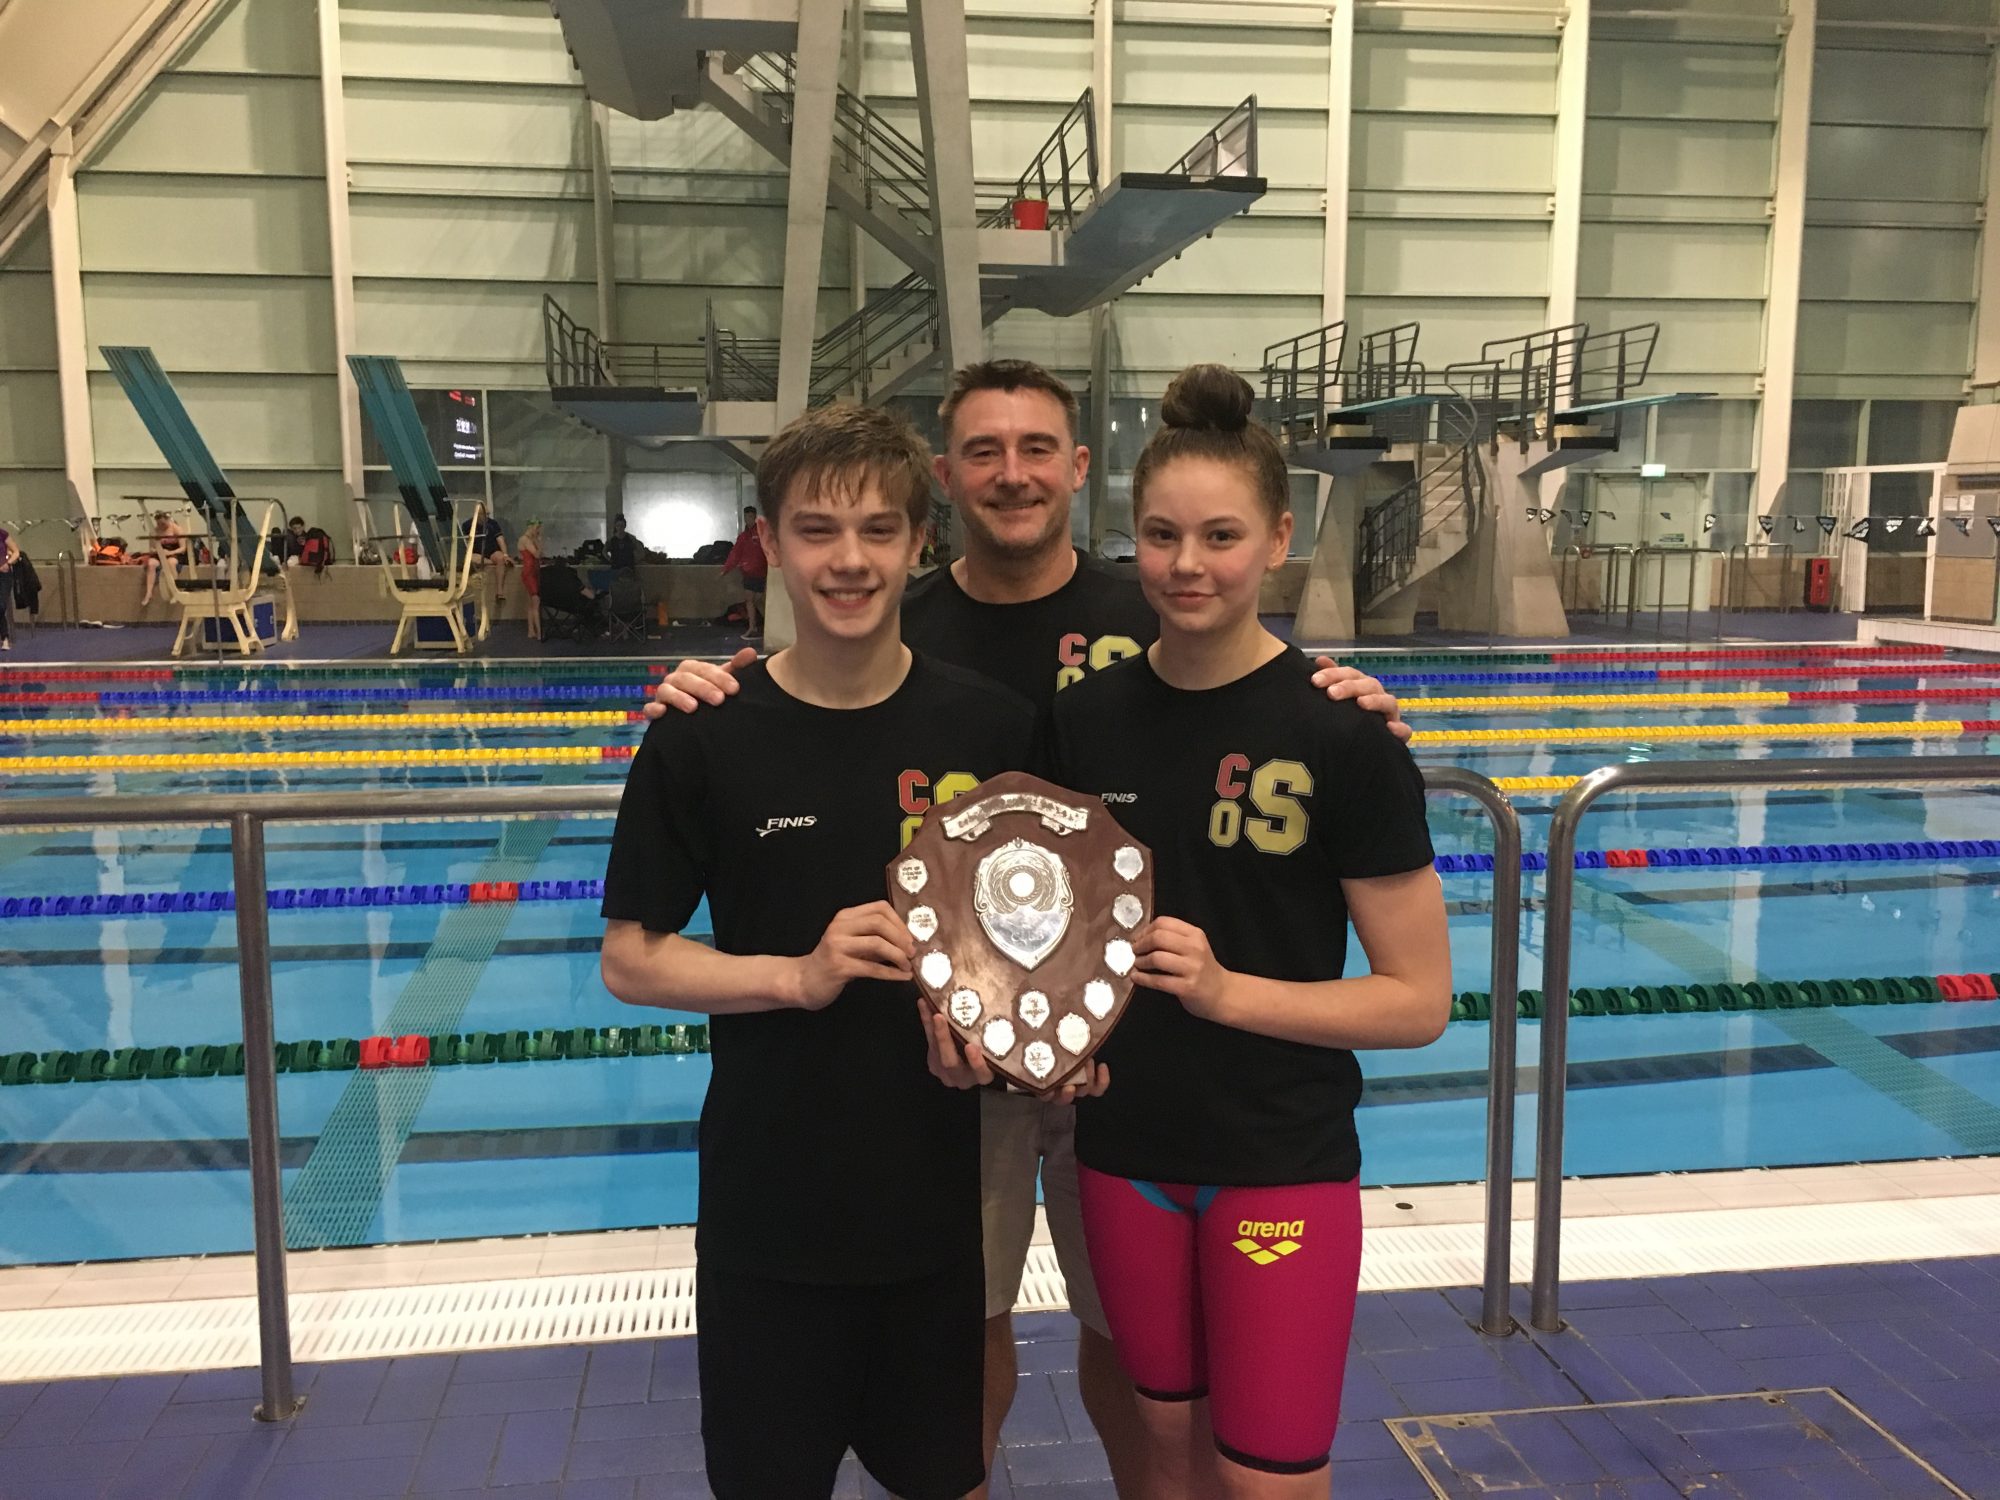 John with two of his swimmers, holding the trophy for Lancashire Top Club, which City of Salford Swimming Club won earlier this year